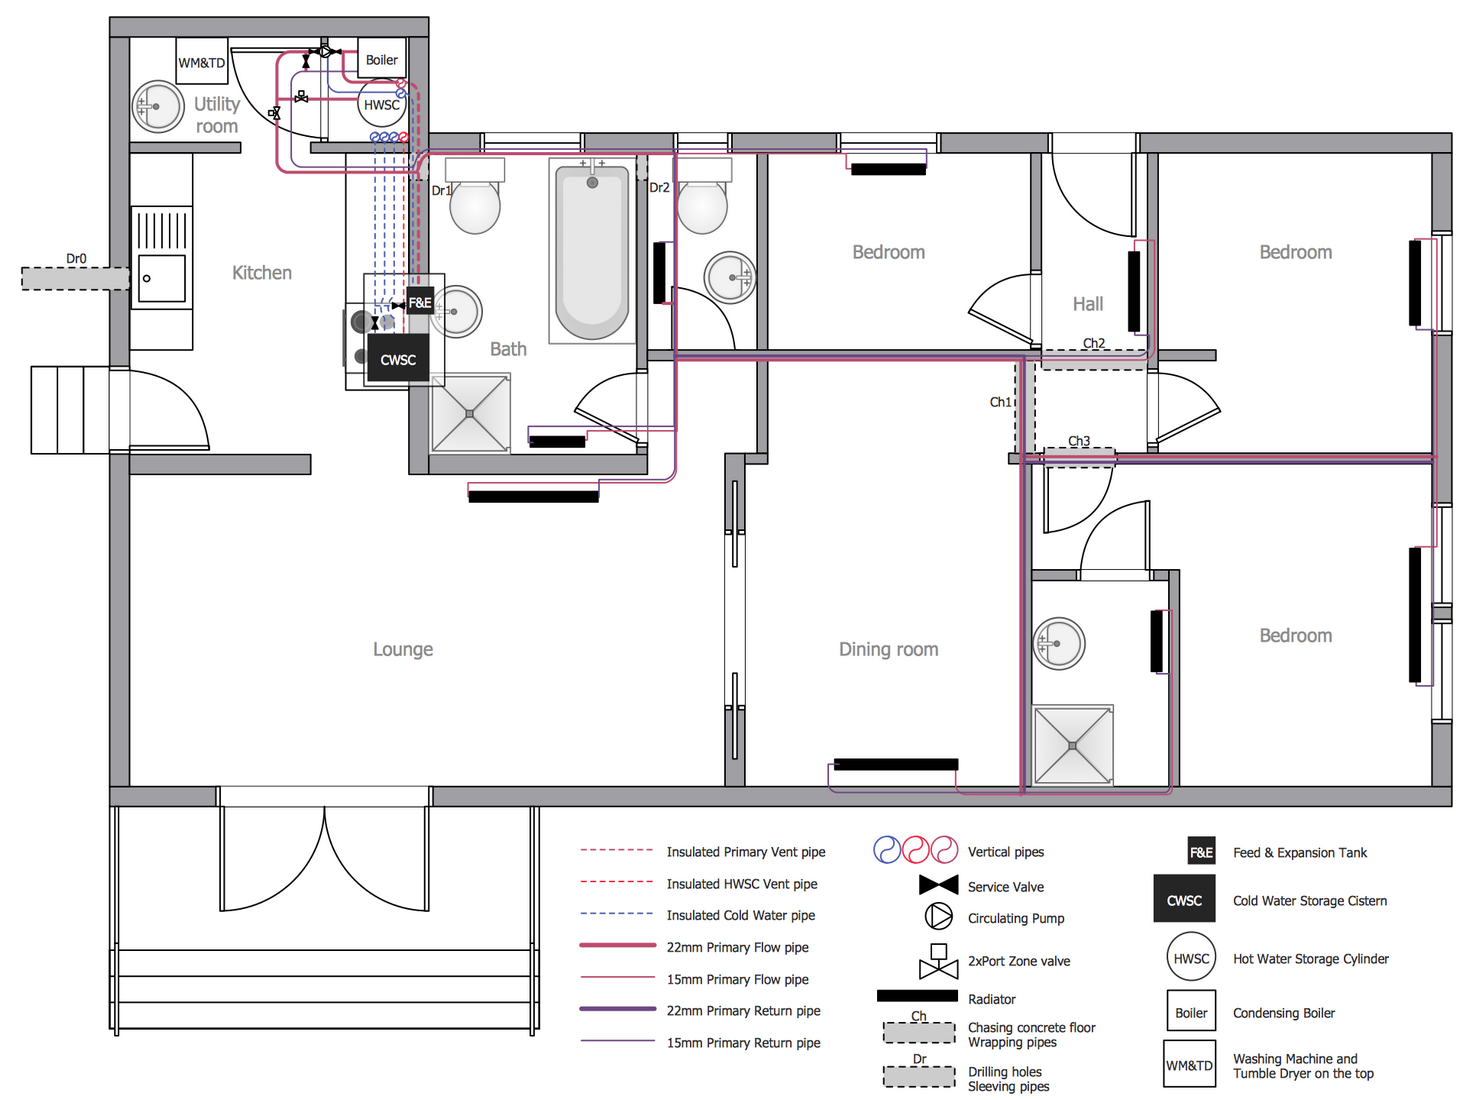  Plumbing and Piping Plans Solution ConceptDraw com